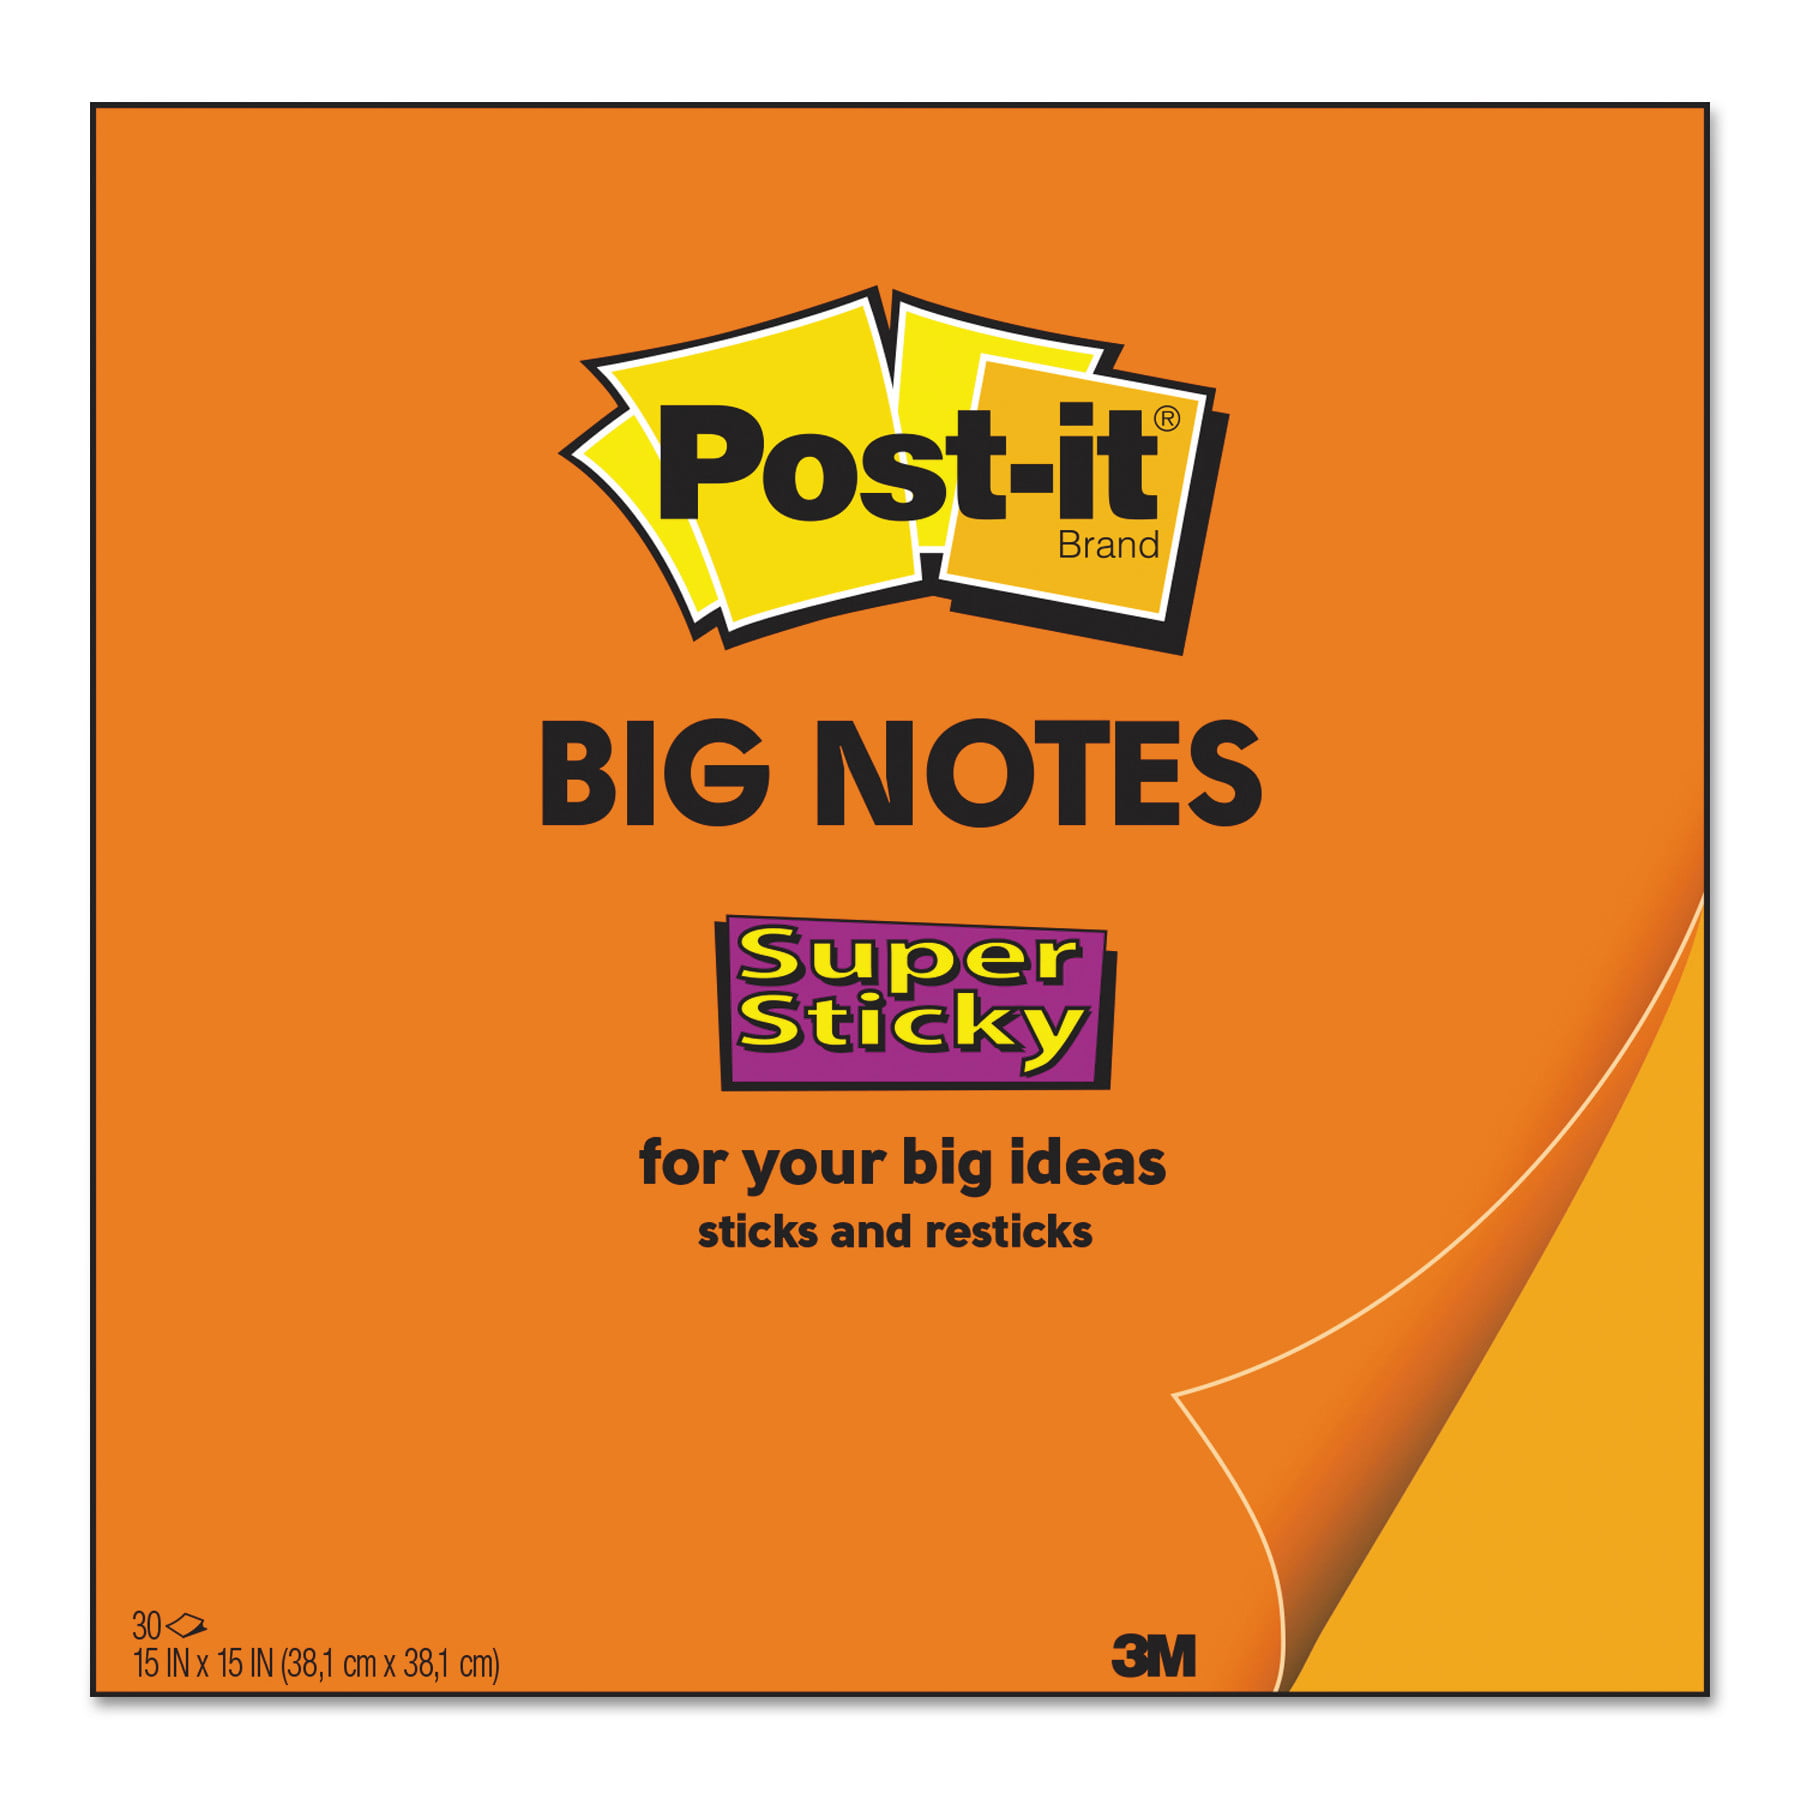  Fuutreo 4 Packs Large Sticky Notes Big Sticky Notes 11 x 11  Inch Wall Pads Jumbo Sticky Notes Memo Post Sticky Yellow Square Notes  Giant Sticky Pads for Wall Office